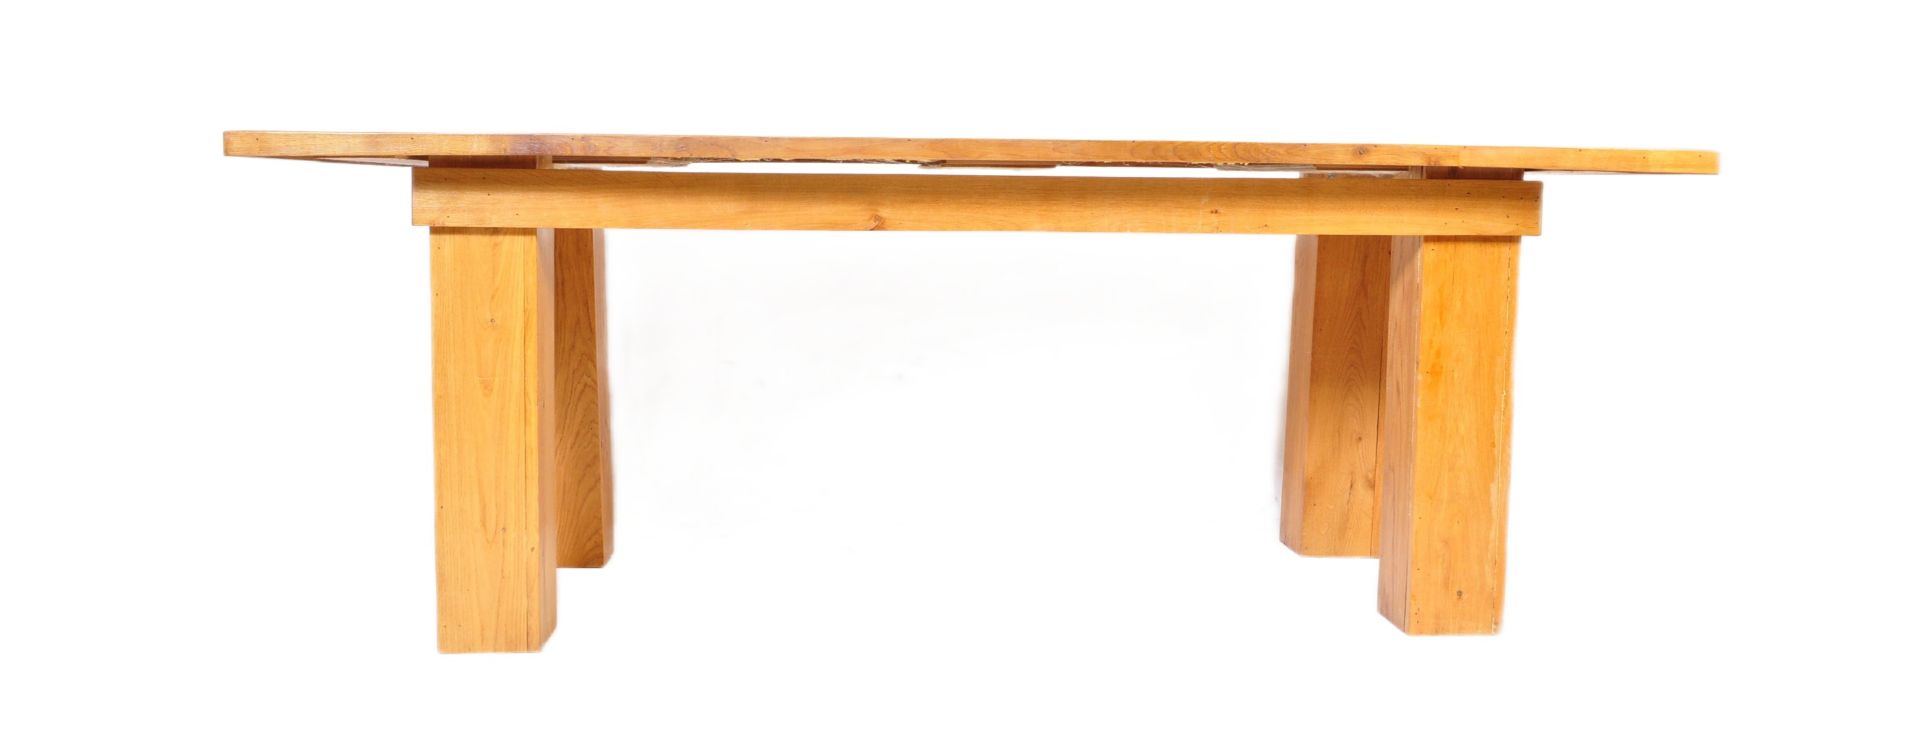 LARGE CONTEMPORARY MODERNIST OAK REFECTORY DINING TABLE